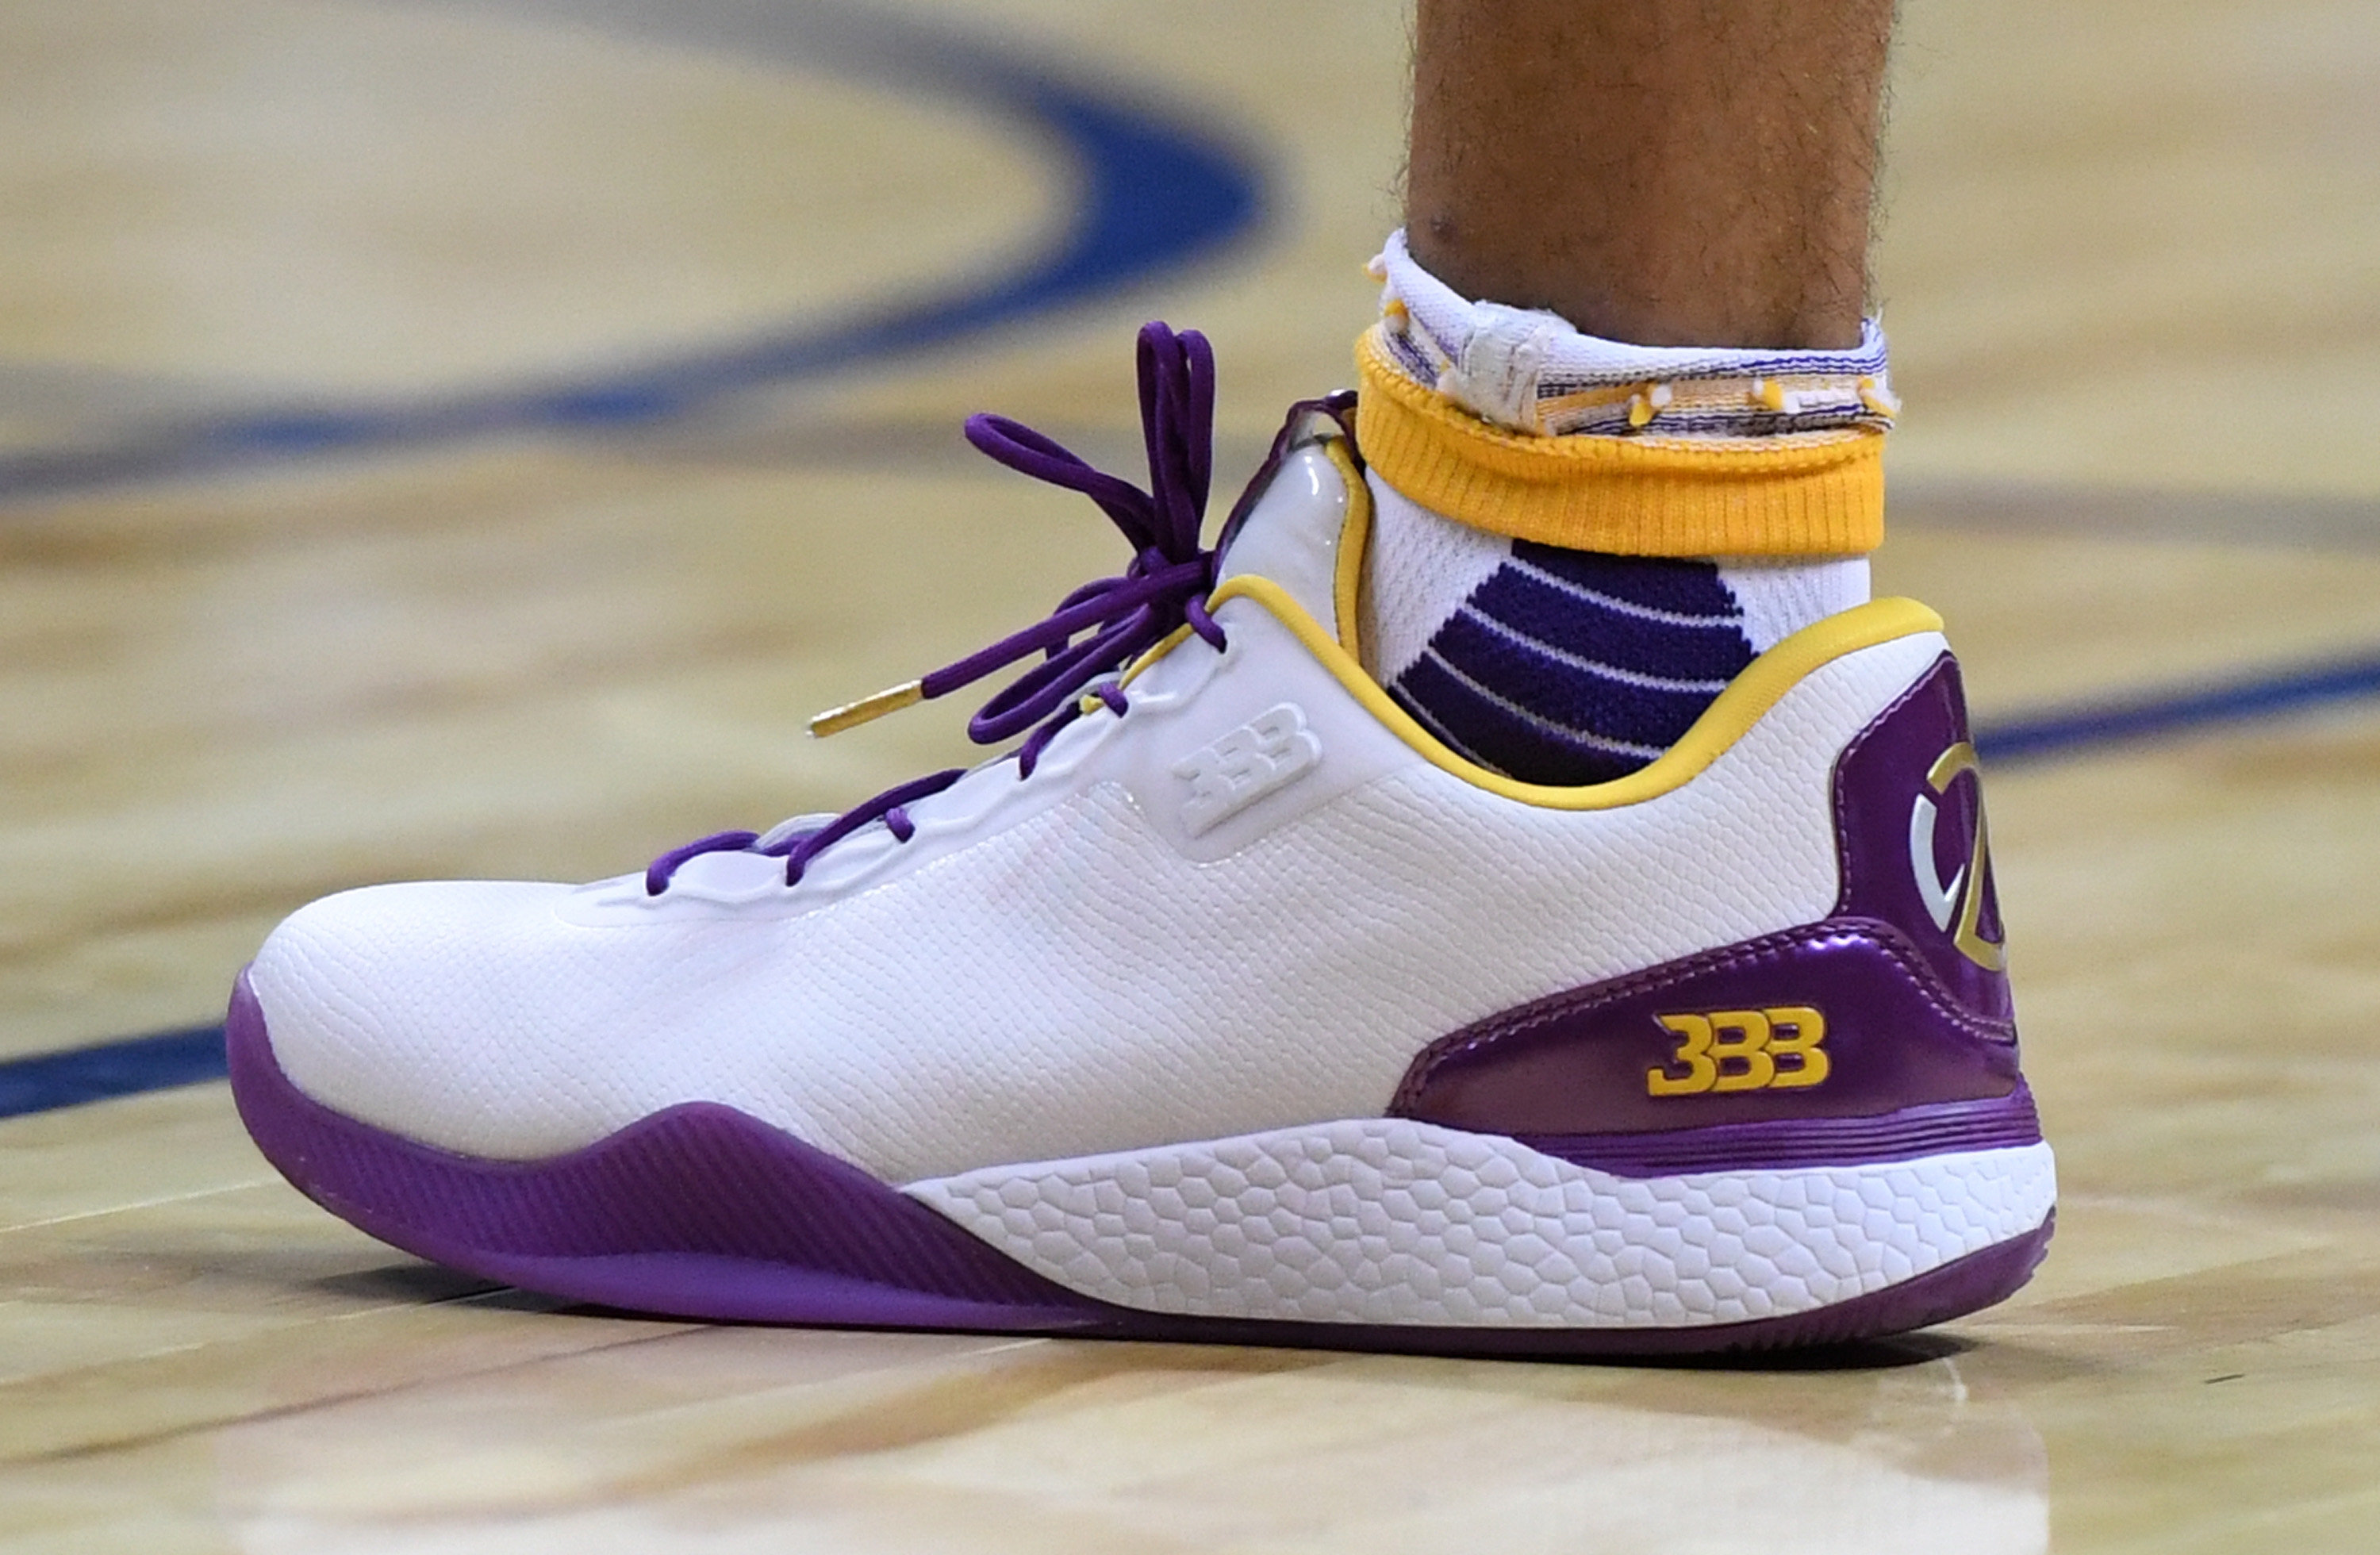 Big Baller Brand Gets An 'F' Rating From The Better Business Bureau And